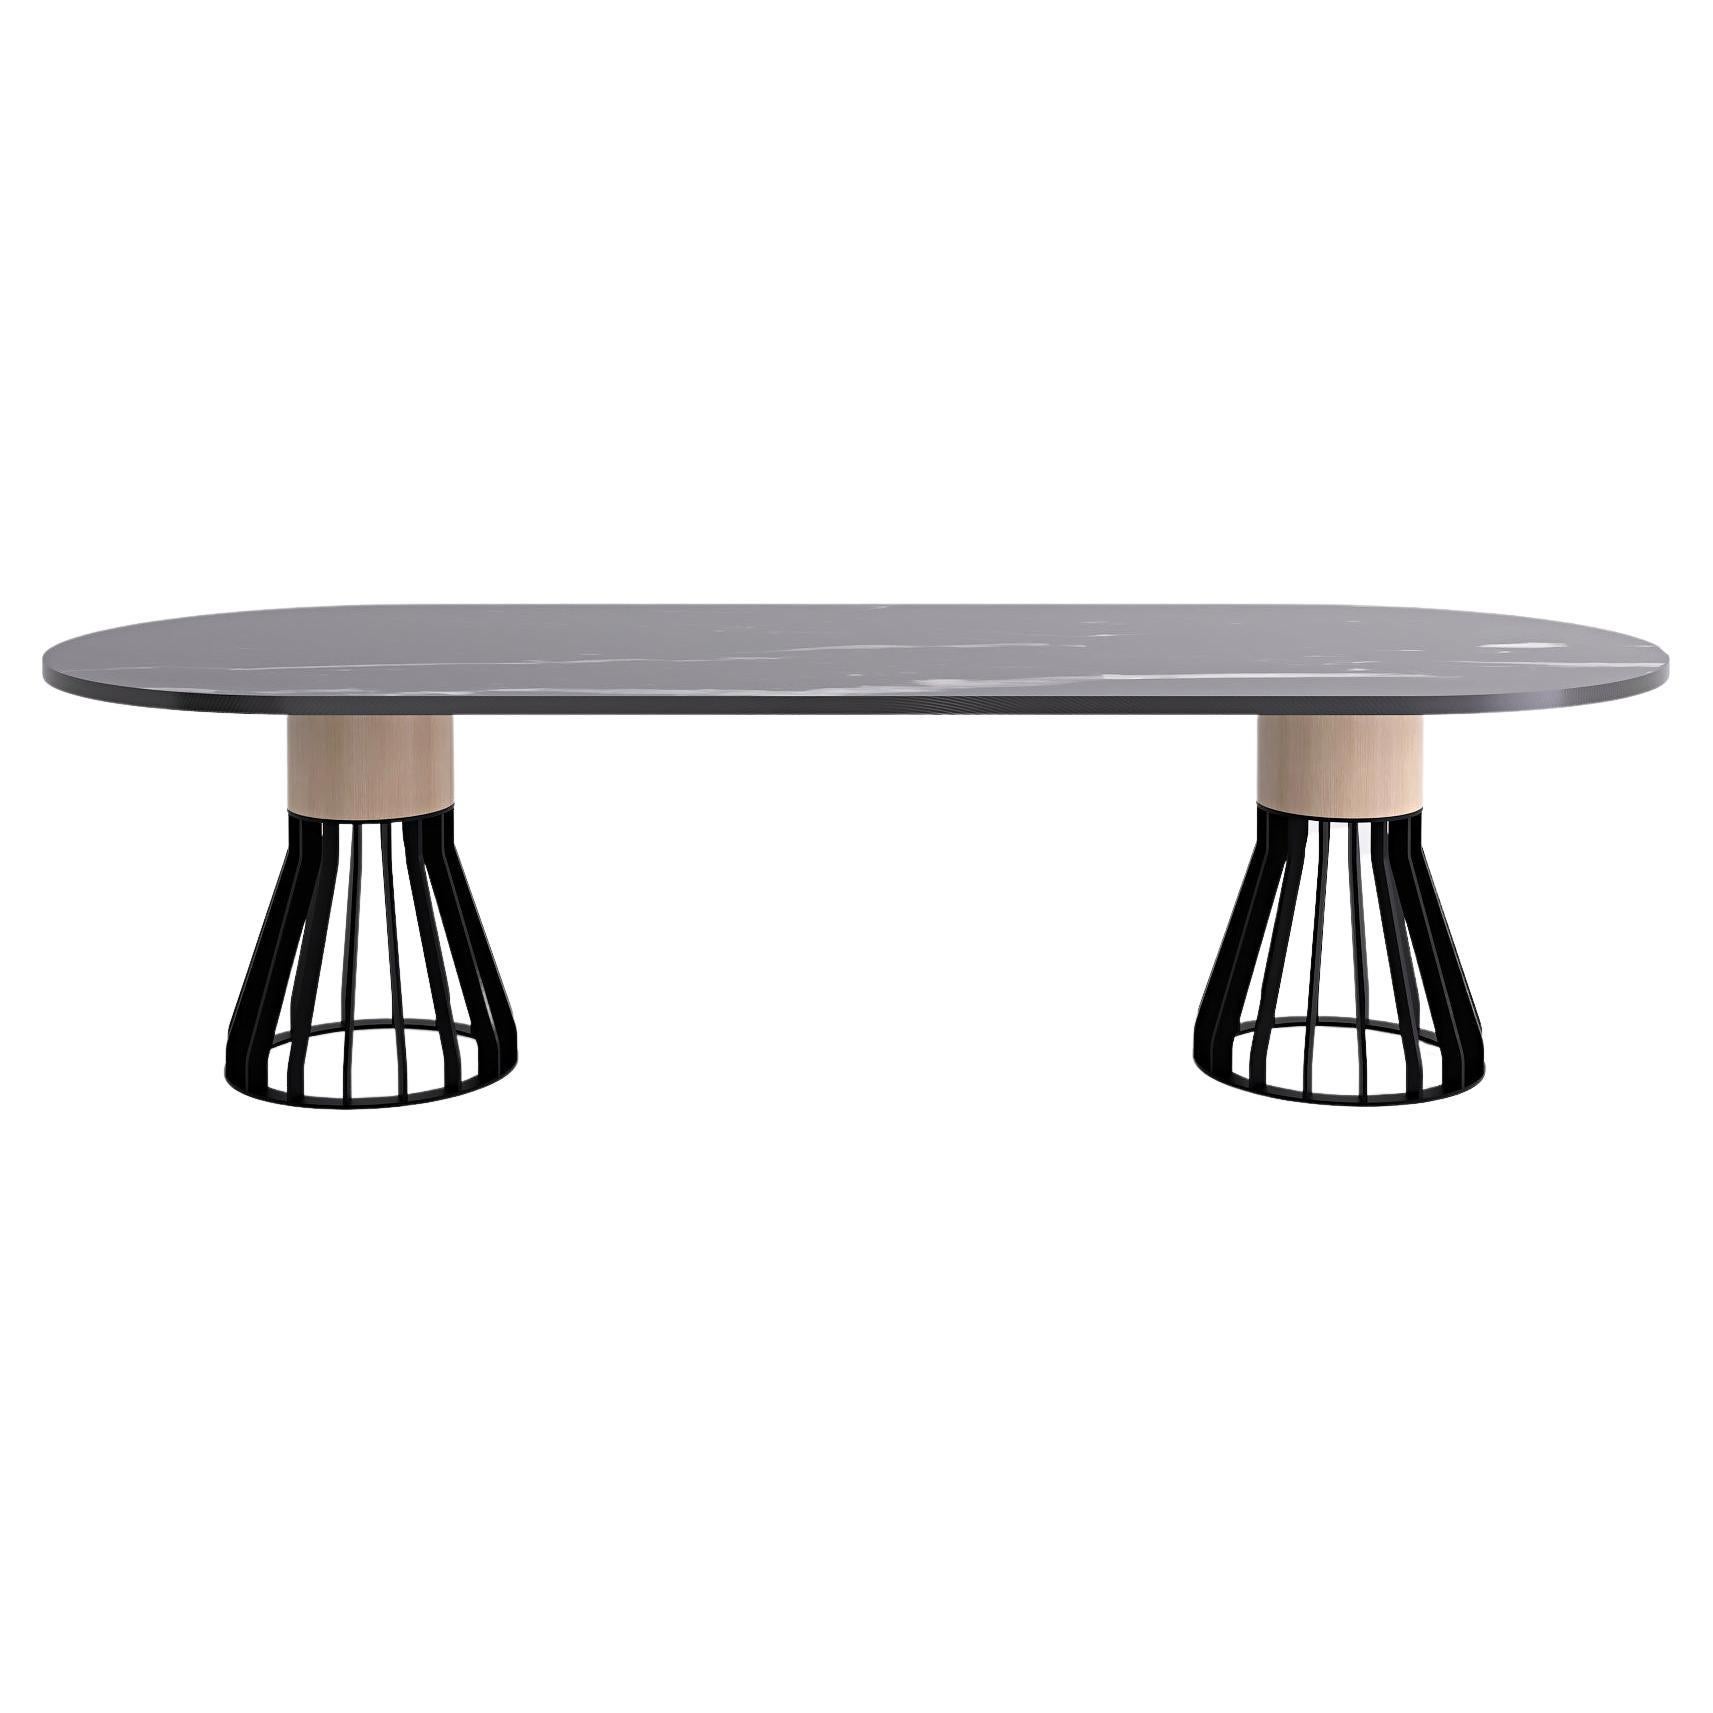 Mewoma Table, Two Legs, Black Legs Black Top by Jonah Takagi for La Chance For Sale